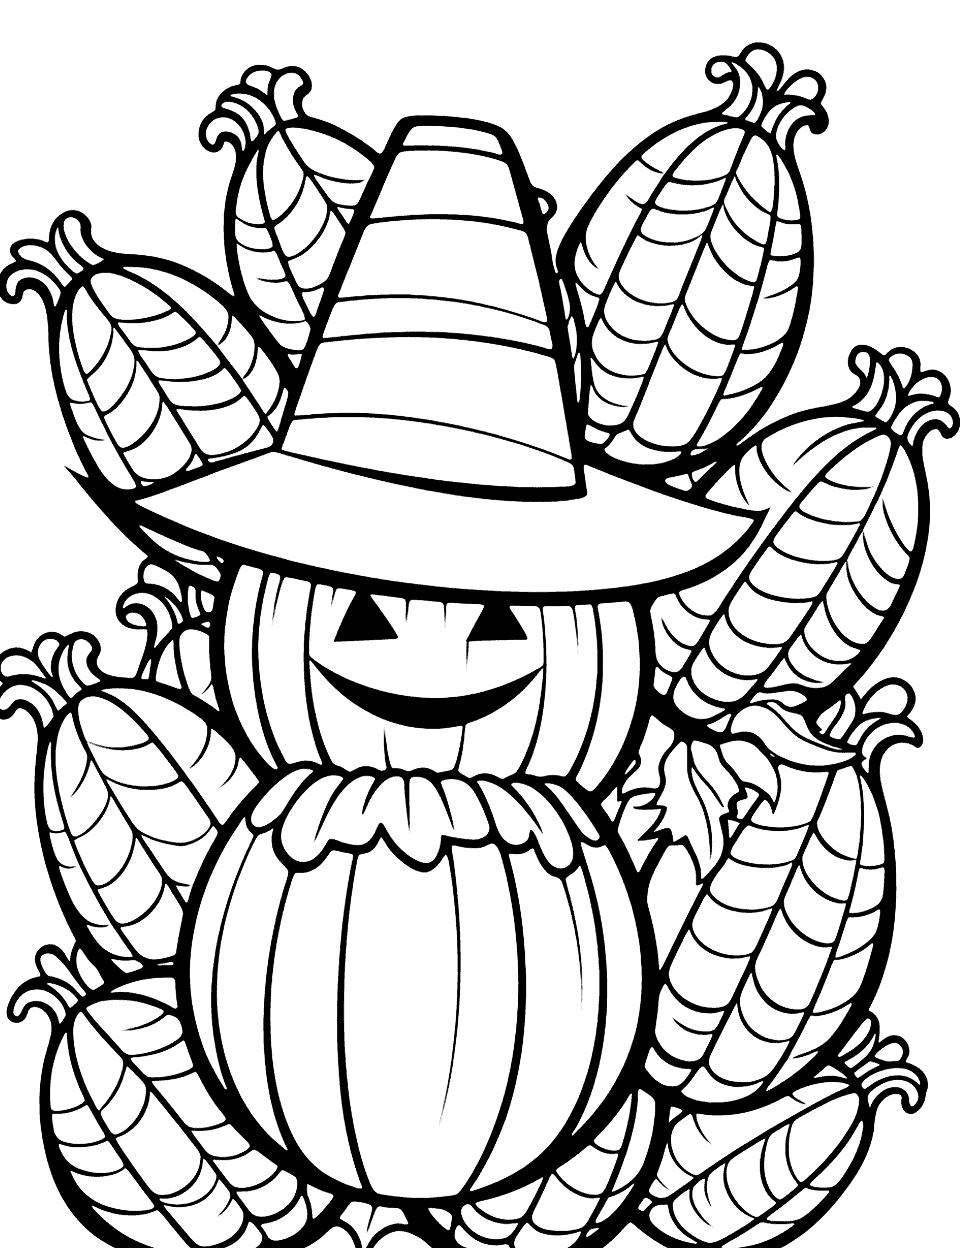 Candy Corn Galore Halloween Coloring Page - A page filled with candy corn pieces, perfect for a lesson on patterns and color repetition.